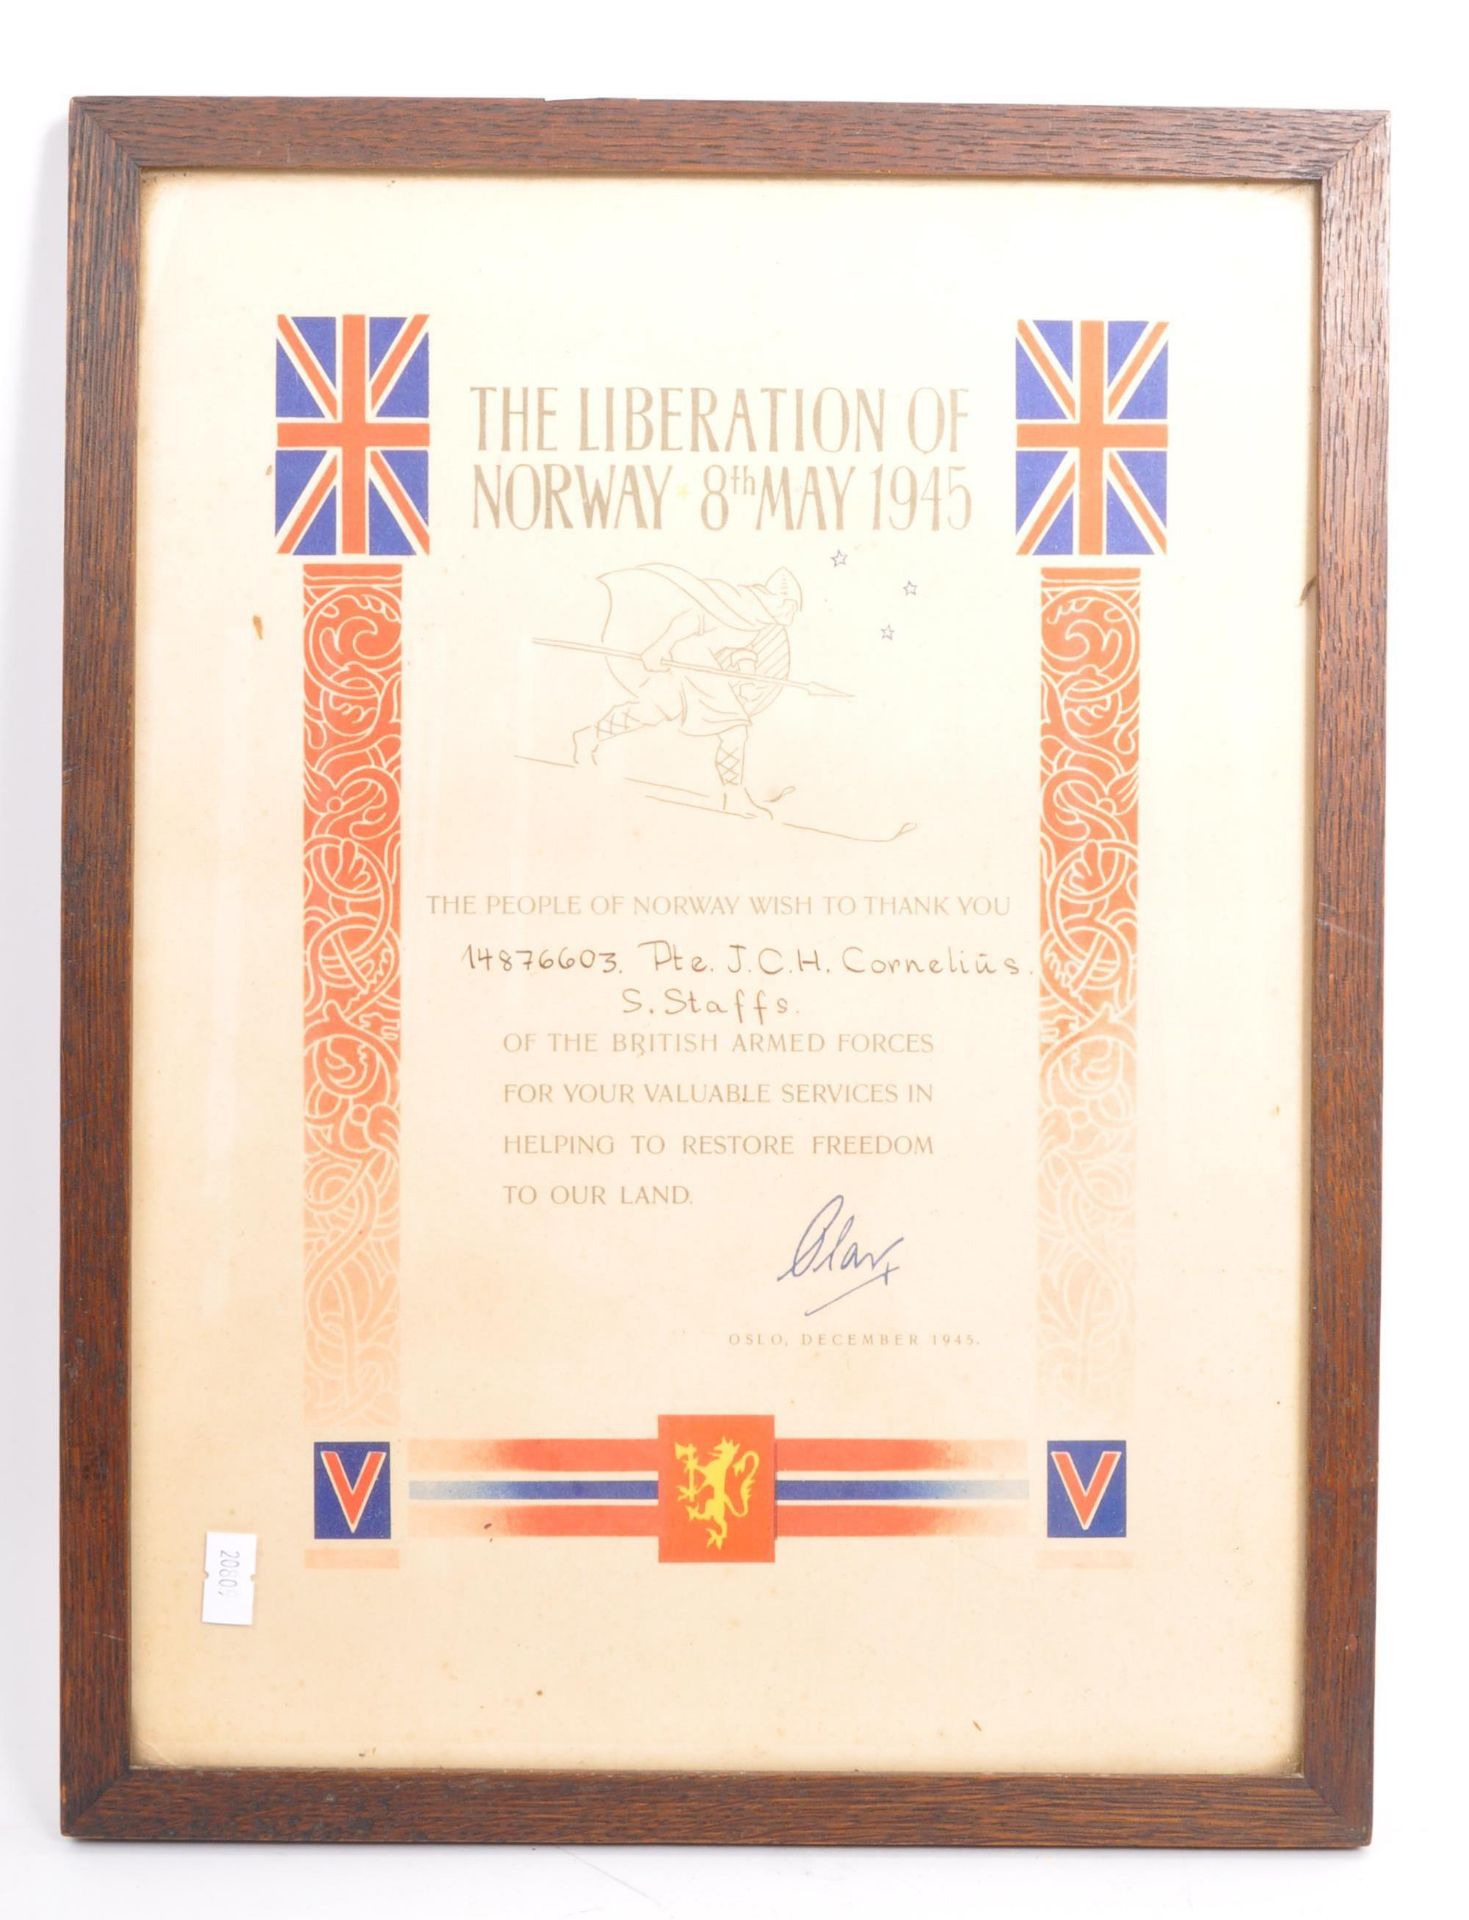 THE LIBERATION OF NORWAY - FRAMED & GLAZED CERTIFICATE